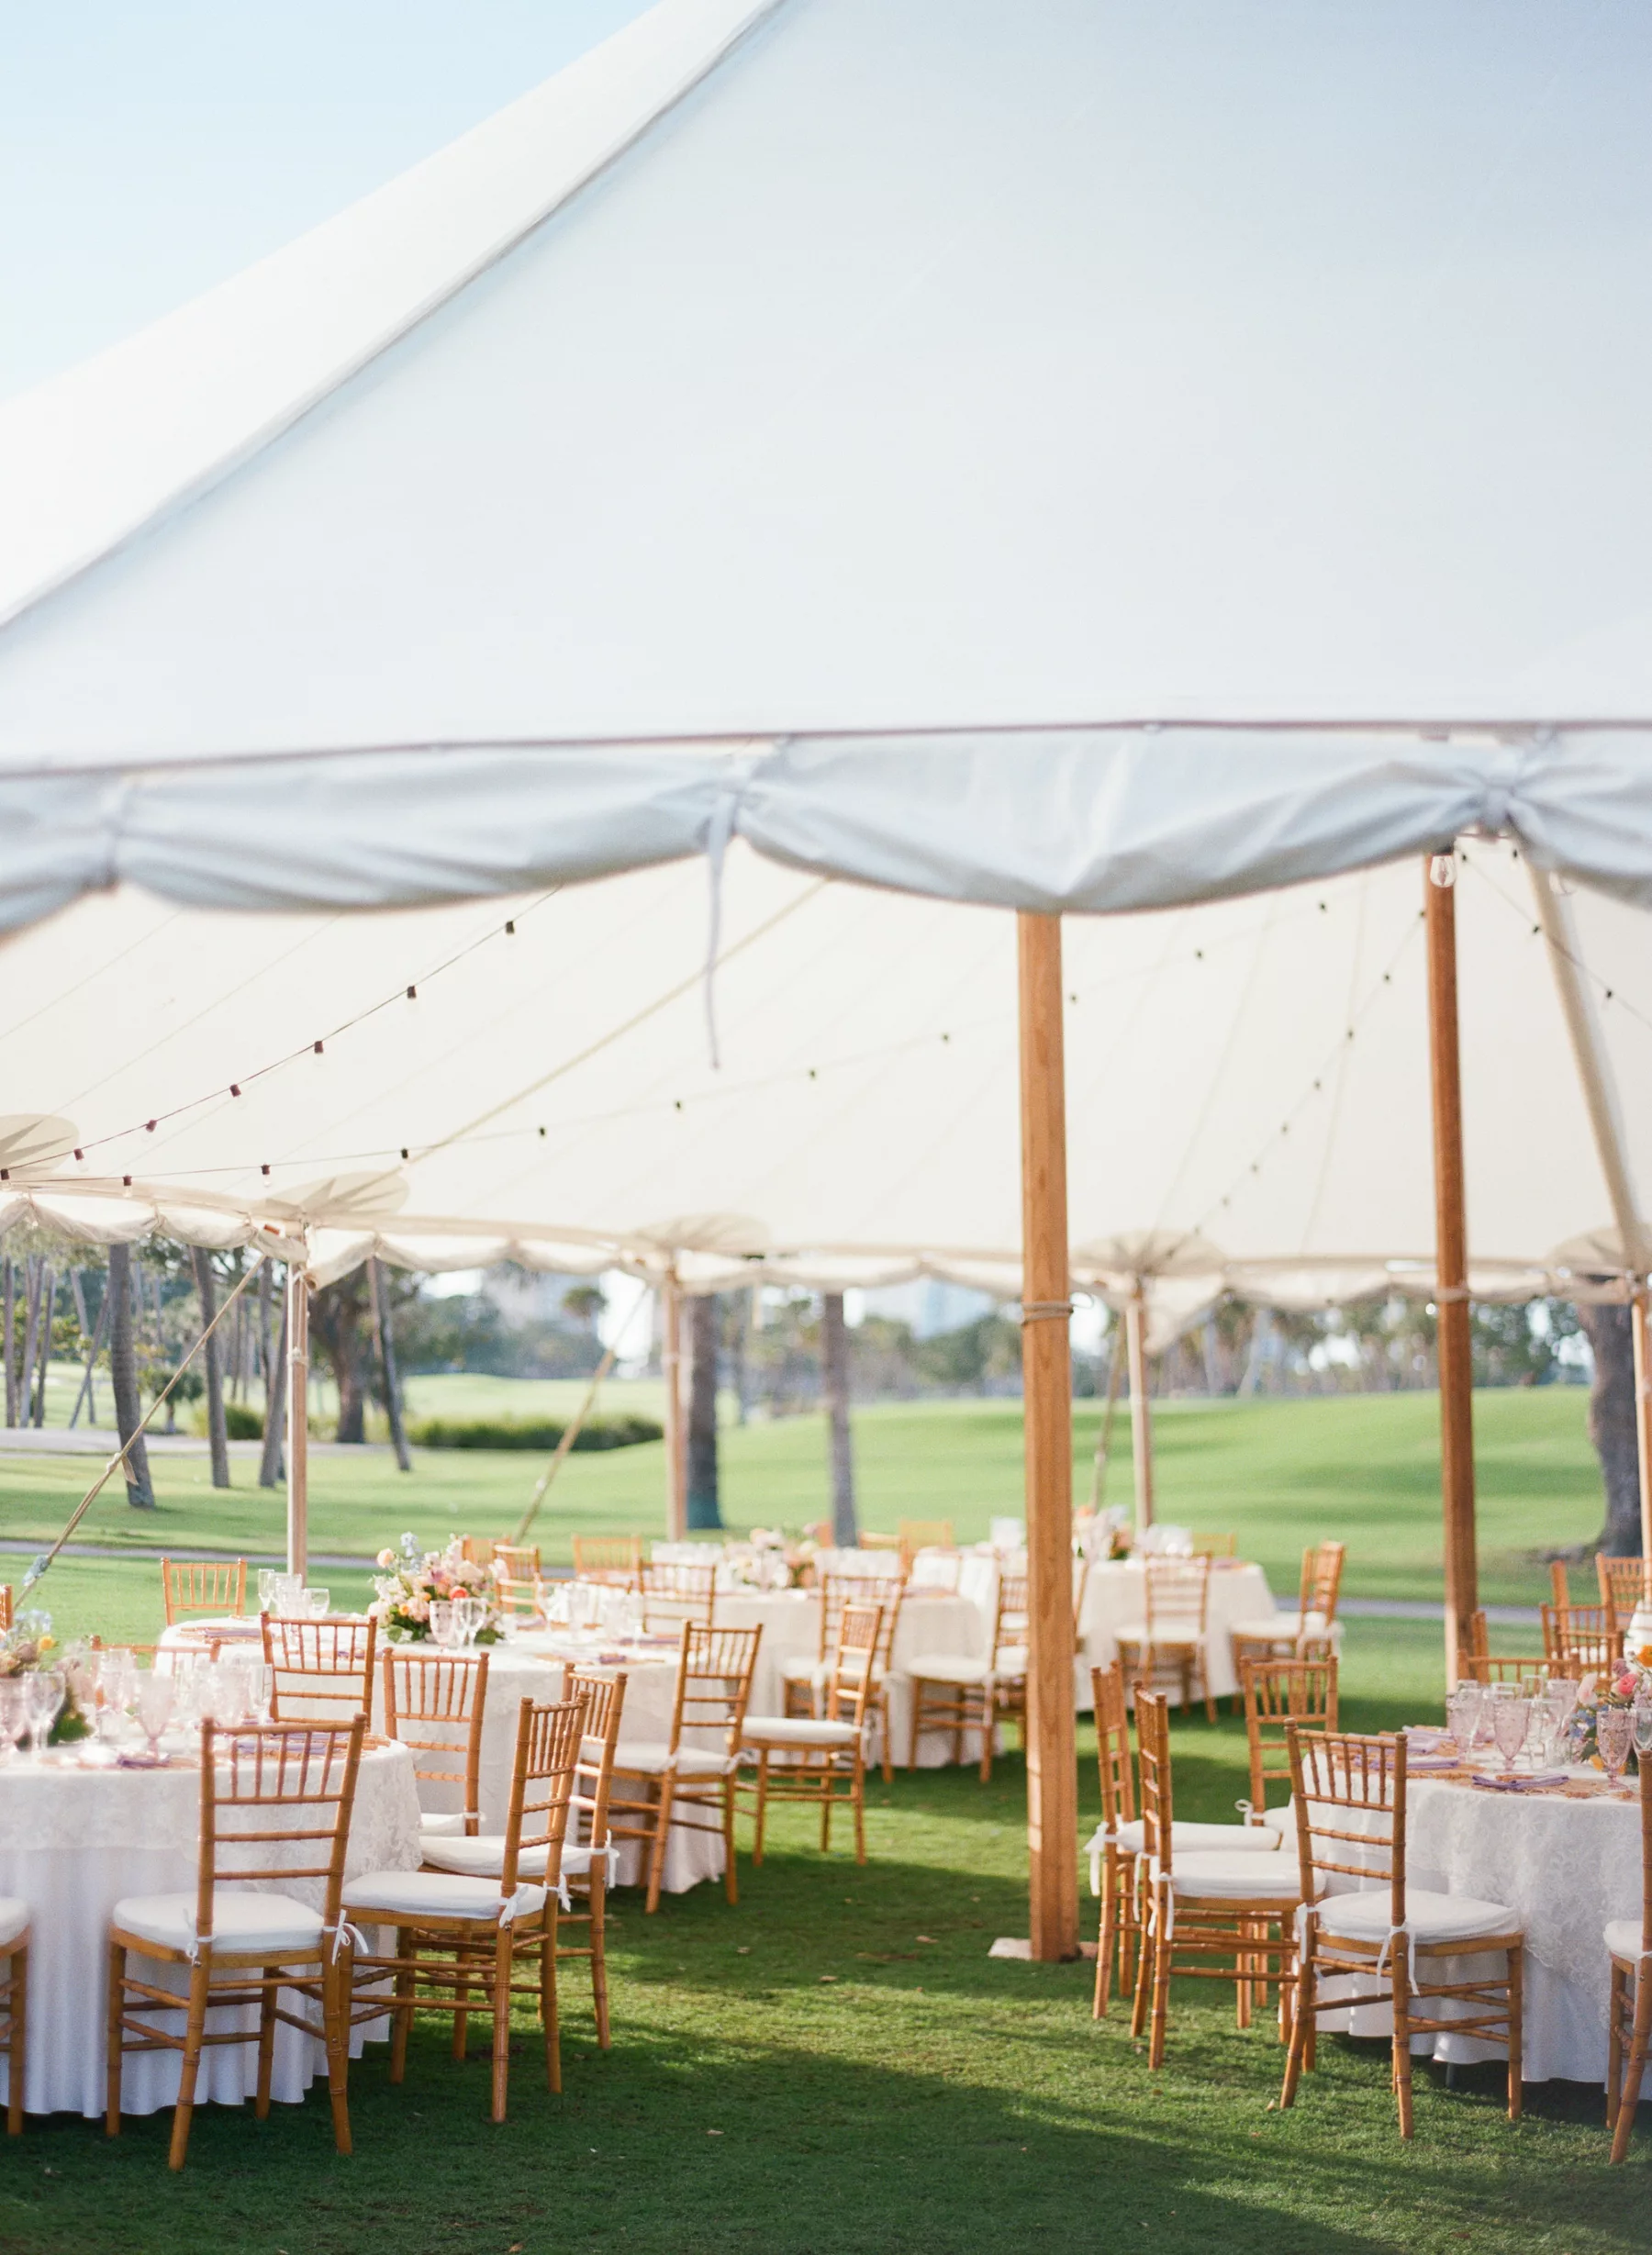 Luxurious Pastel Old Florida Wedding Reception Decor with Gold Chaivari Chairs Inspiration | Tampa Bay Event Venue The REsort At Longboat Key Club